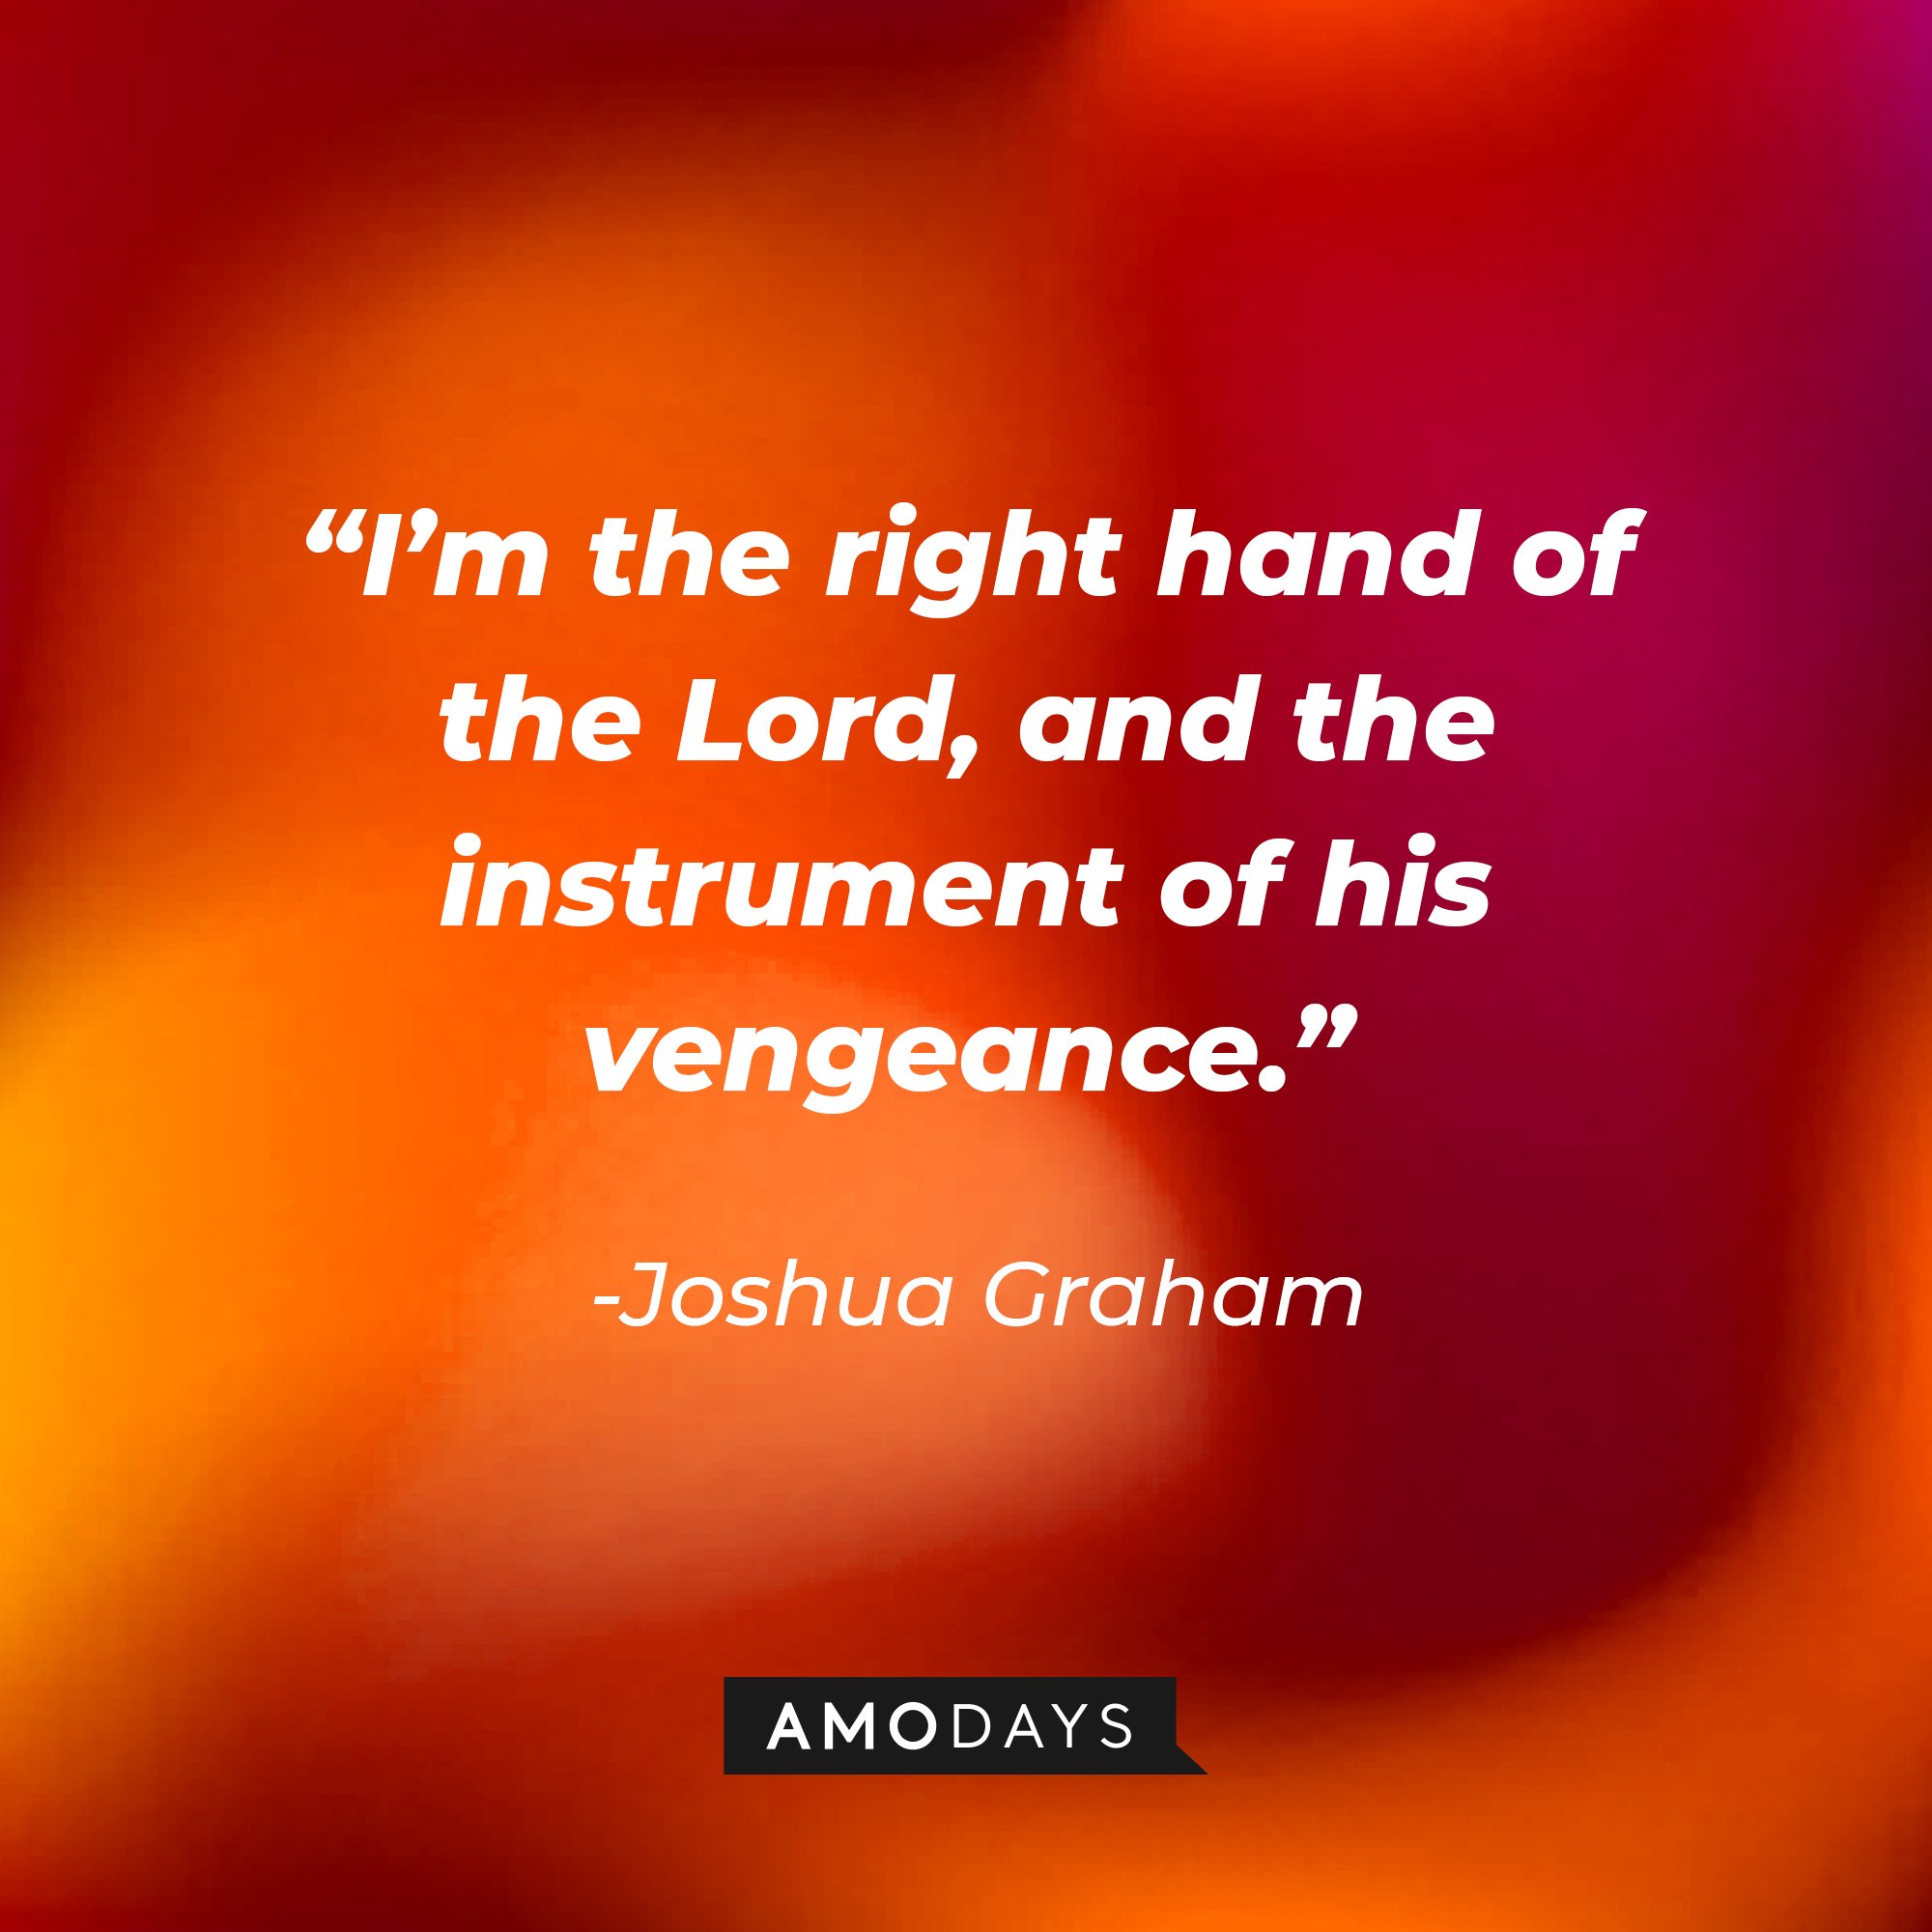 Joshua Graham's quote:“I’m the right hand of the Lord, and the instrument of his vengeance.”   | Source: Amodays